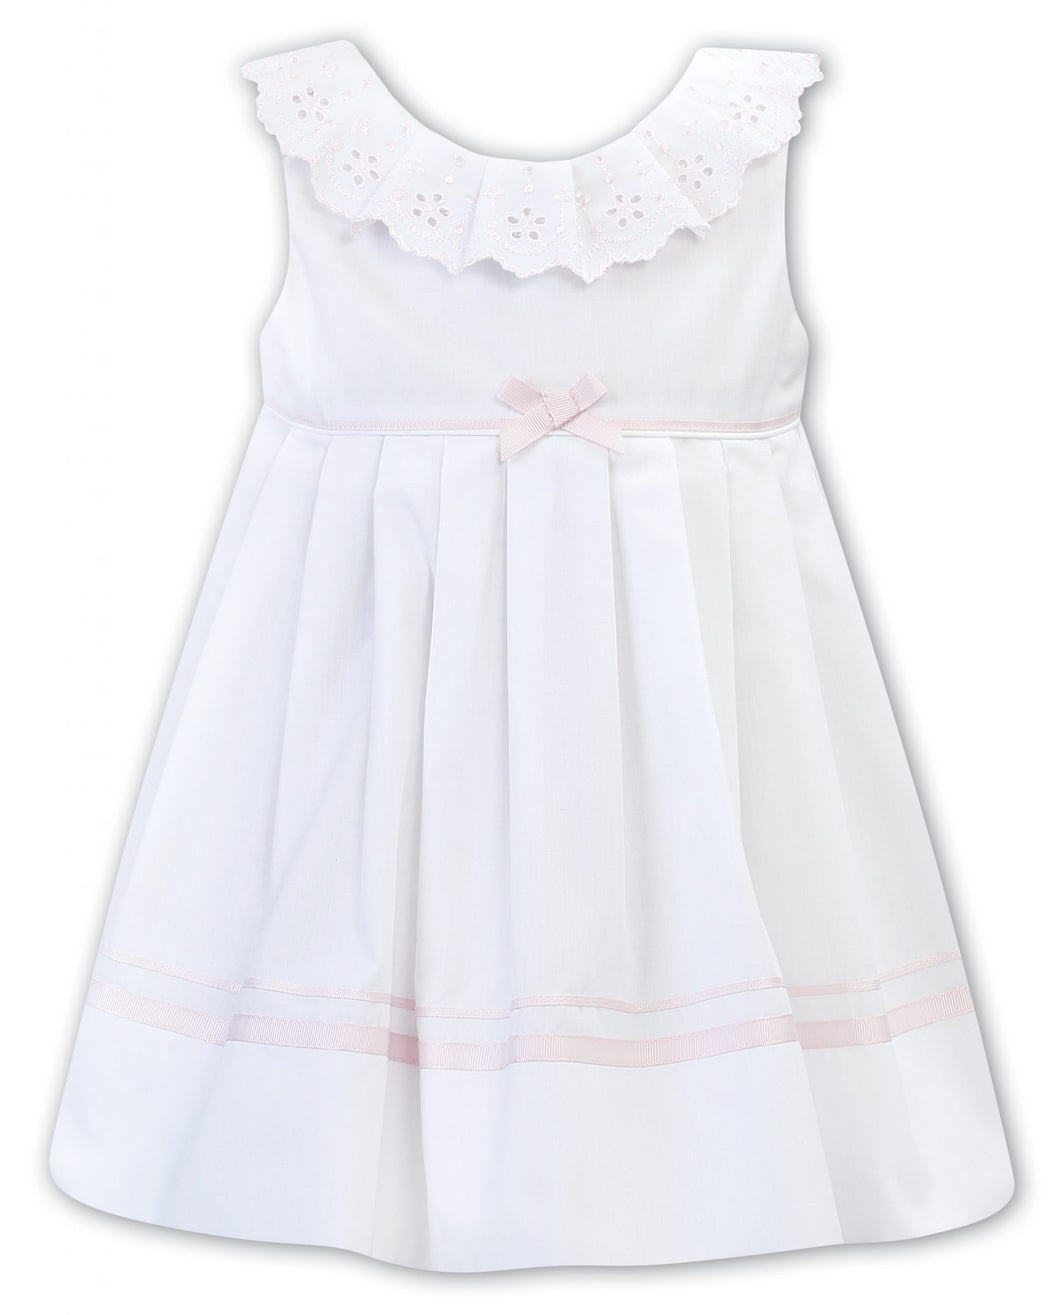 Girls Sleeveless Dress with Embroidered Detailed Frilled Collar, Ribbon and Bow Trim Detail on Waist and Hemline. V Back